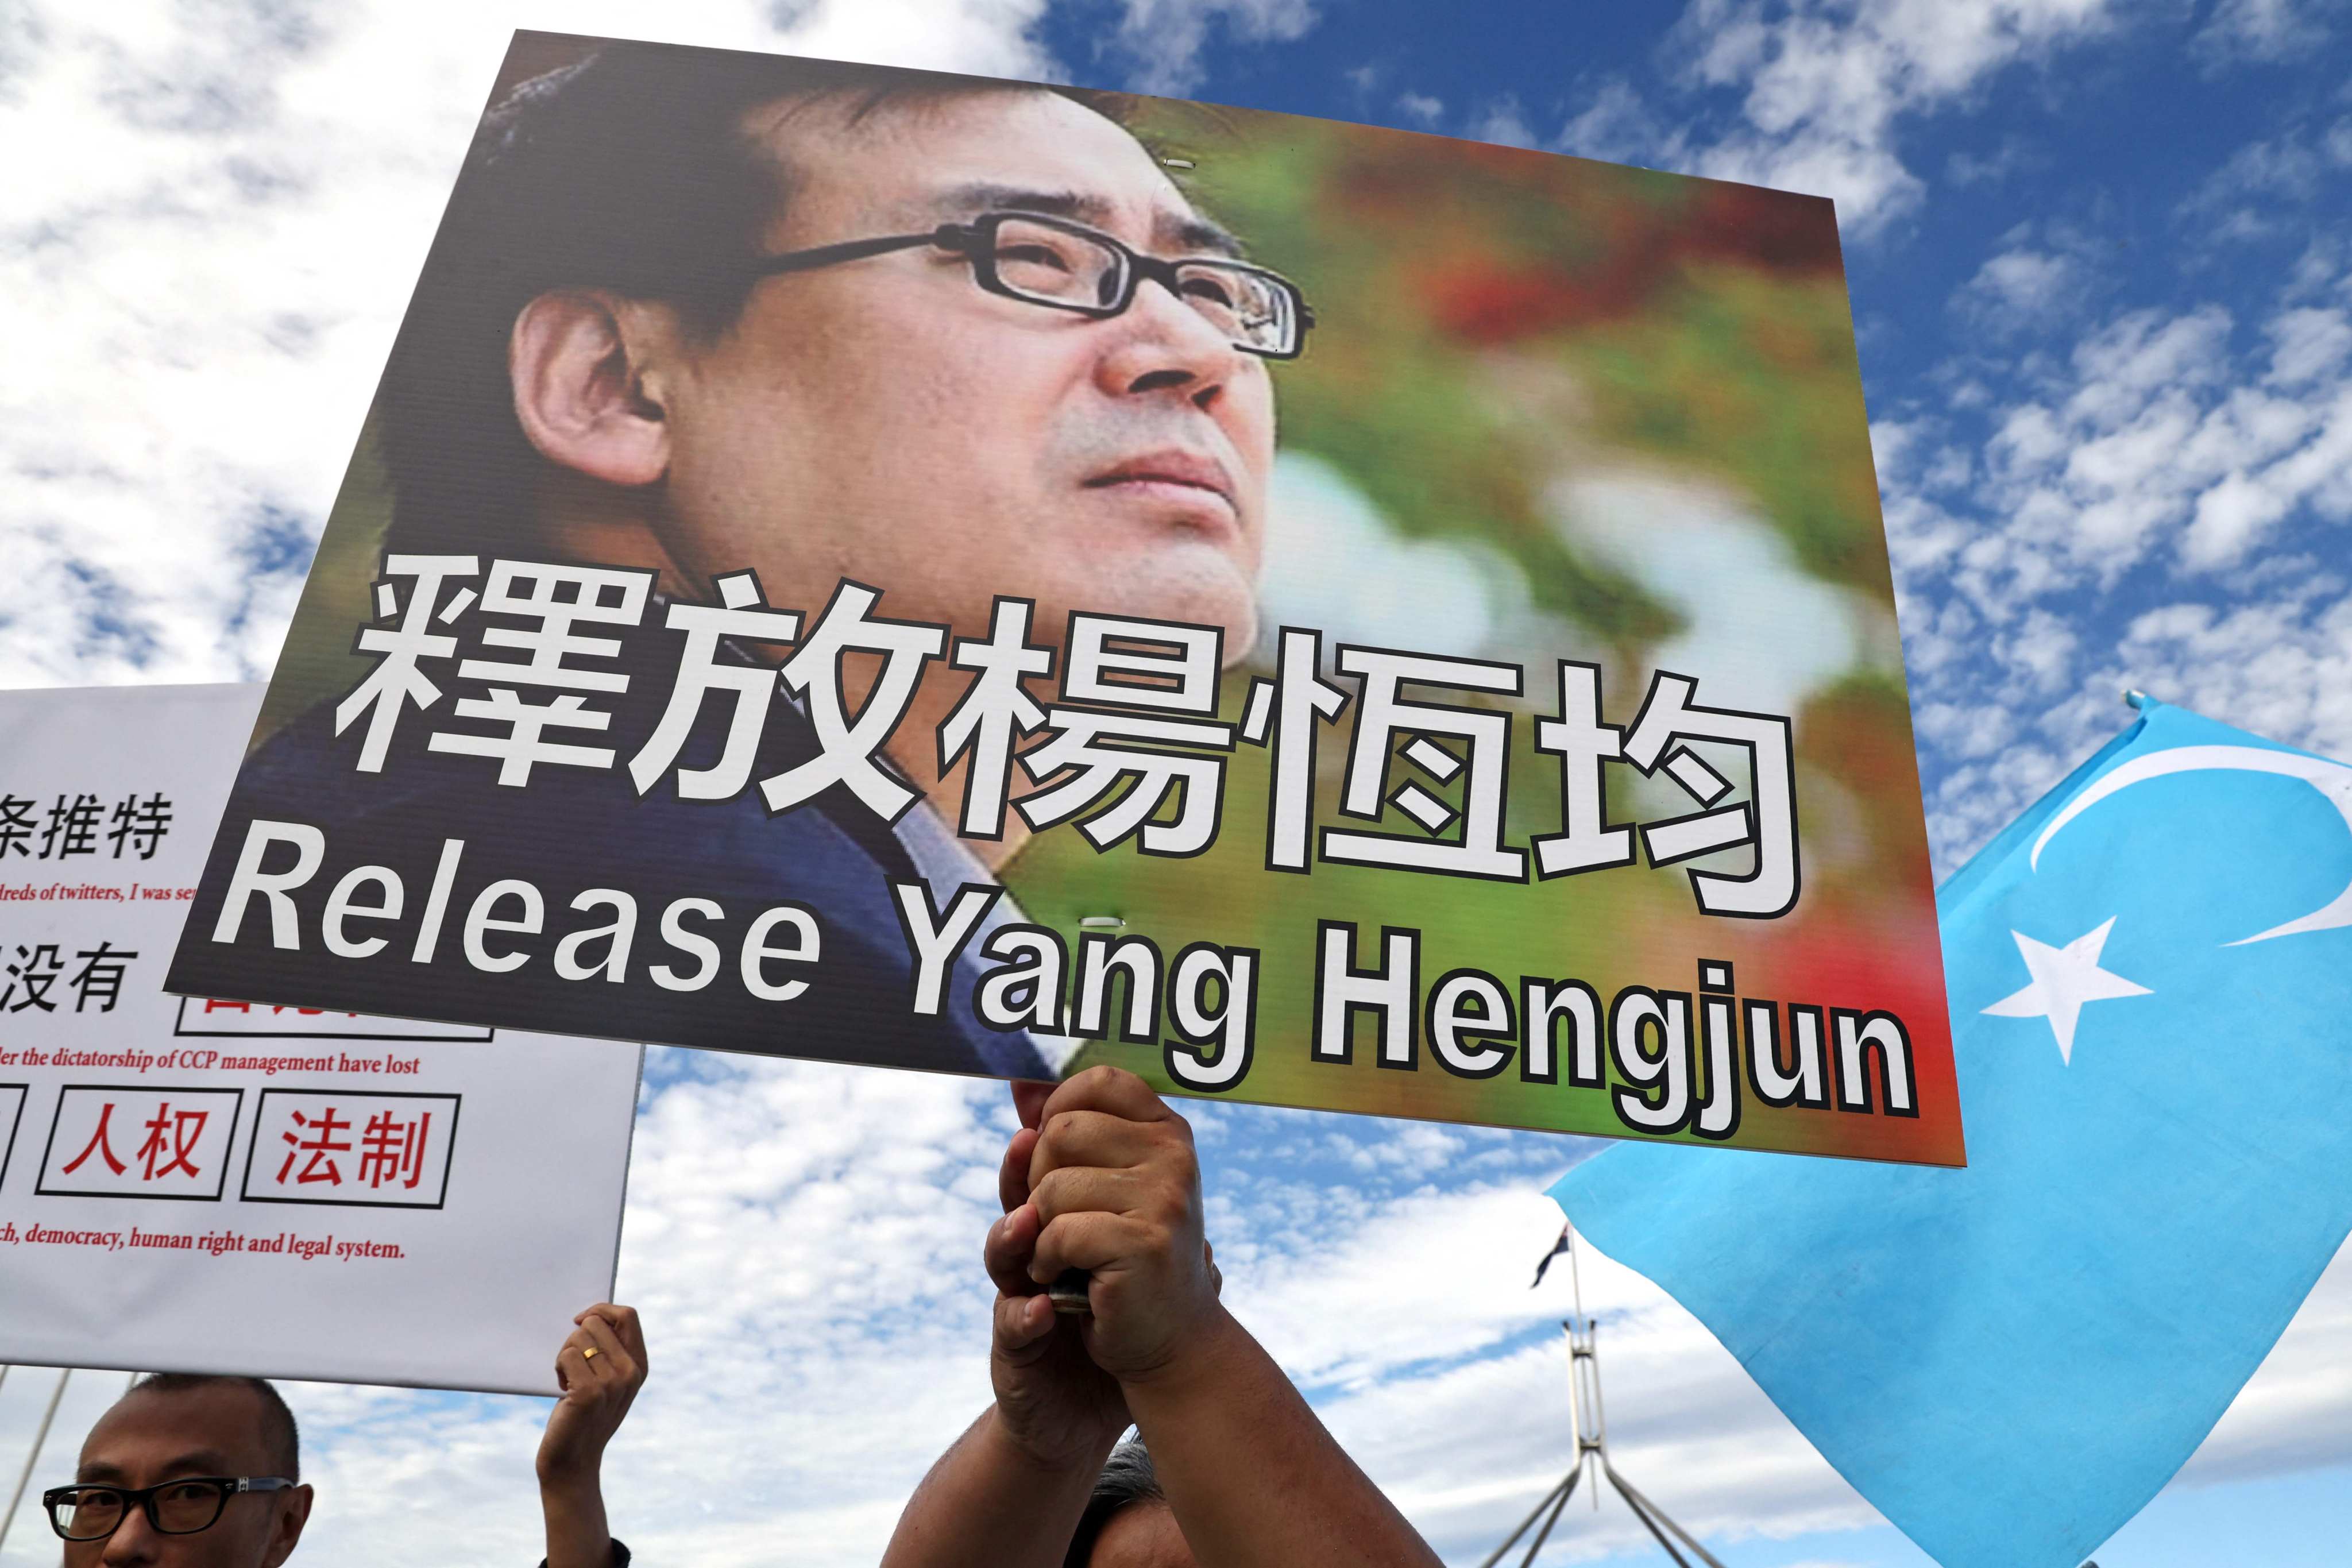 Protesters hold placards demanding the release of writer and businessman Yang Hengjun during a rally outside Parliament House in Canberra in March. Photo: AFP